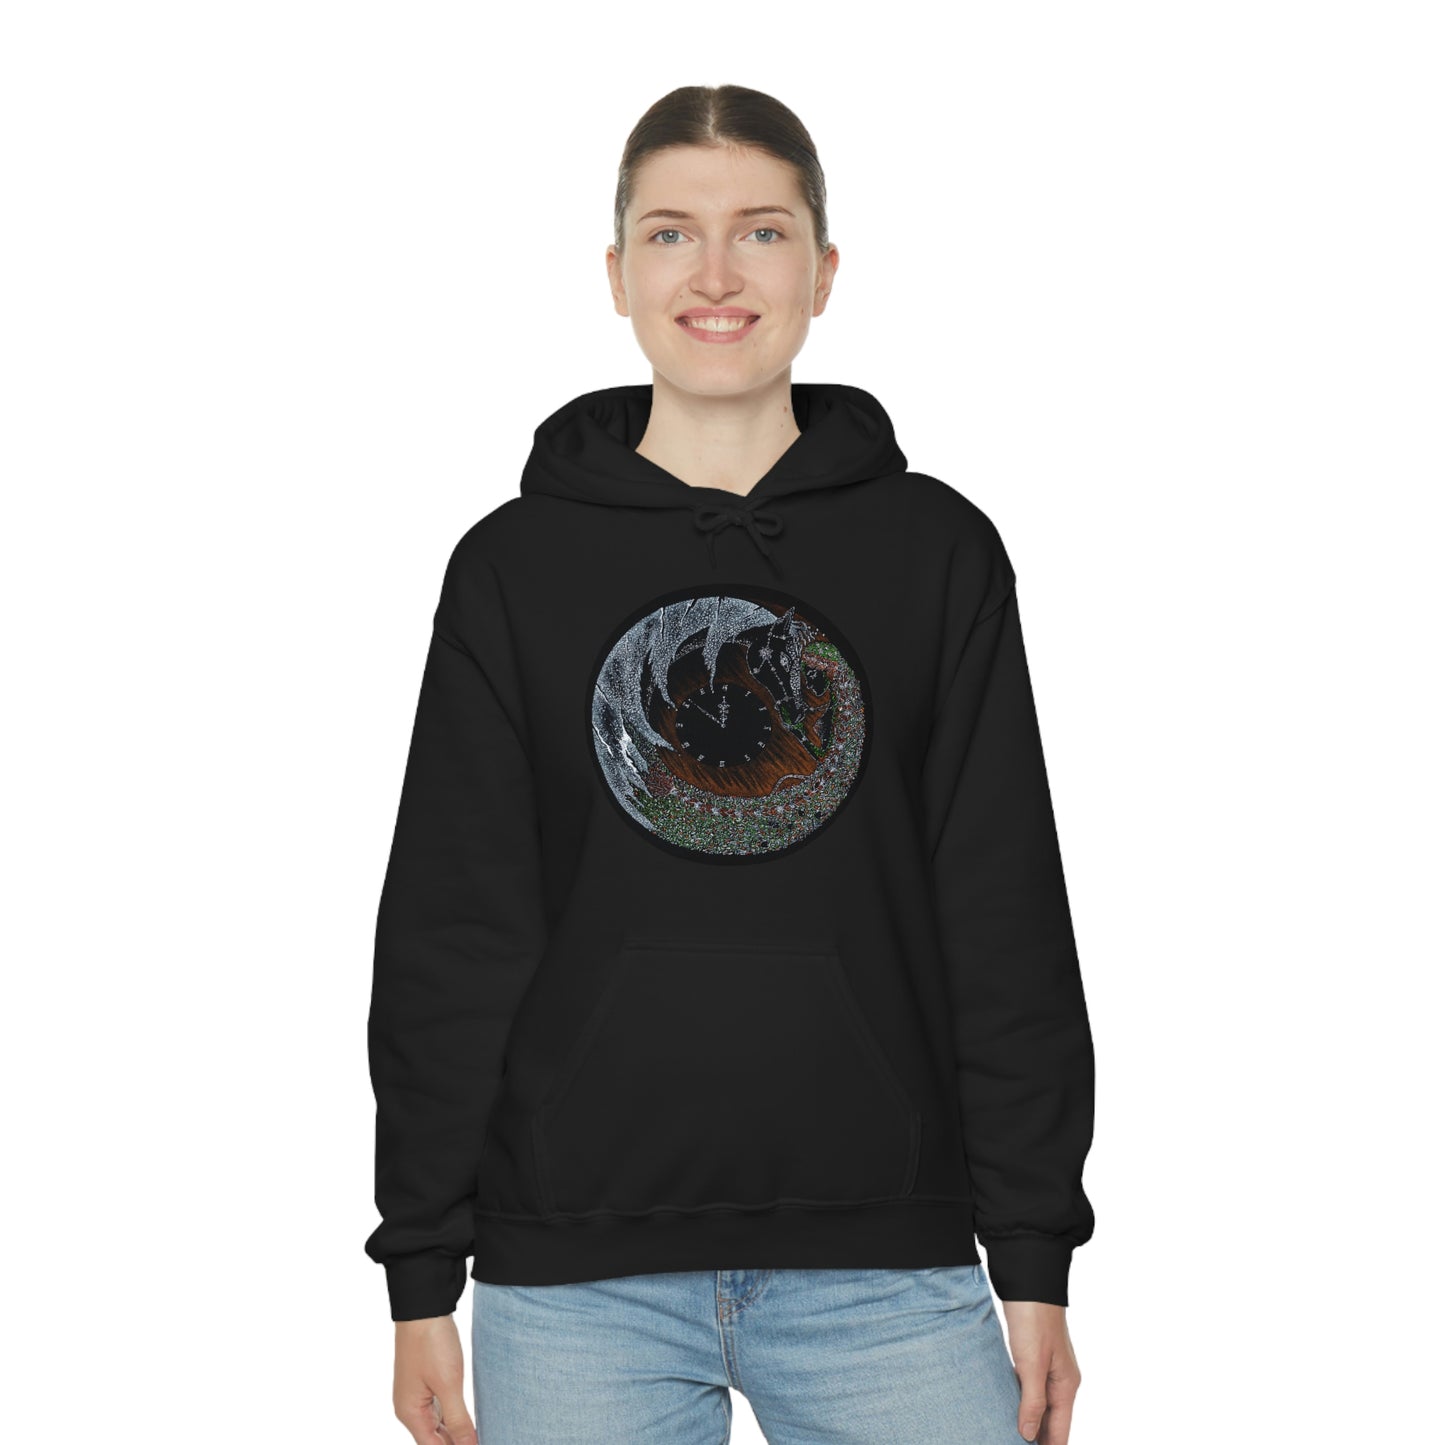 Chinese Zodiac Sign Hoodie (Horse)